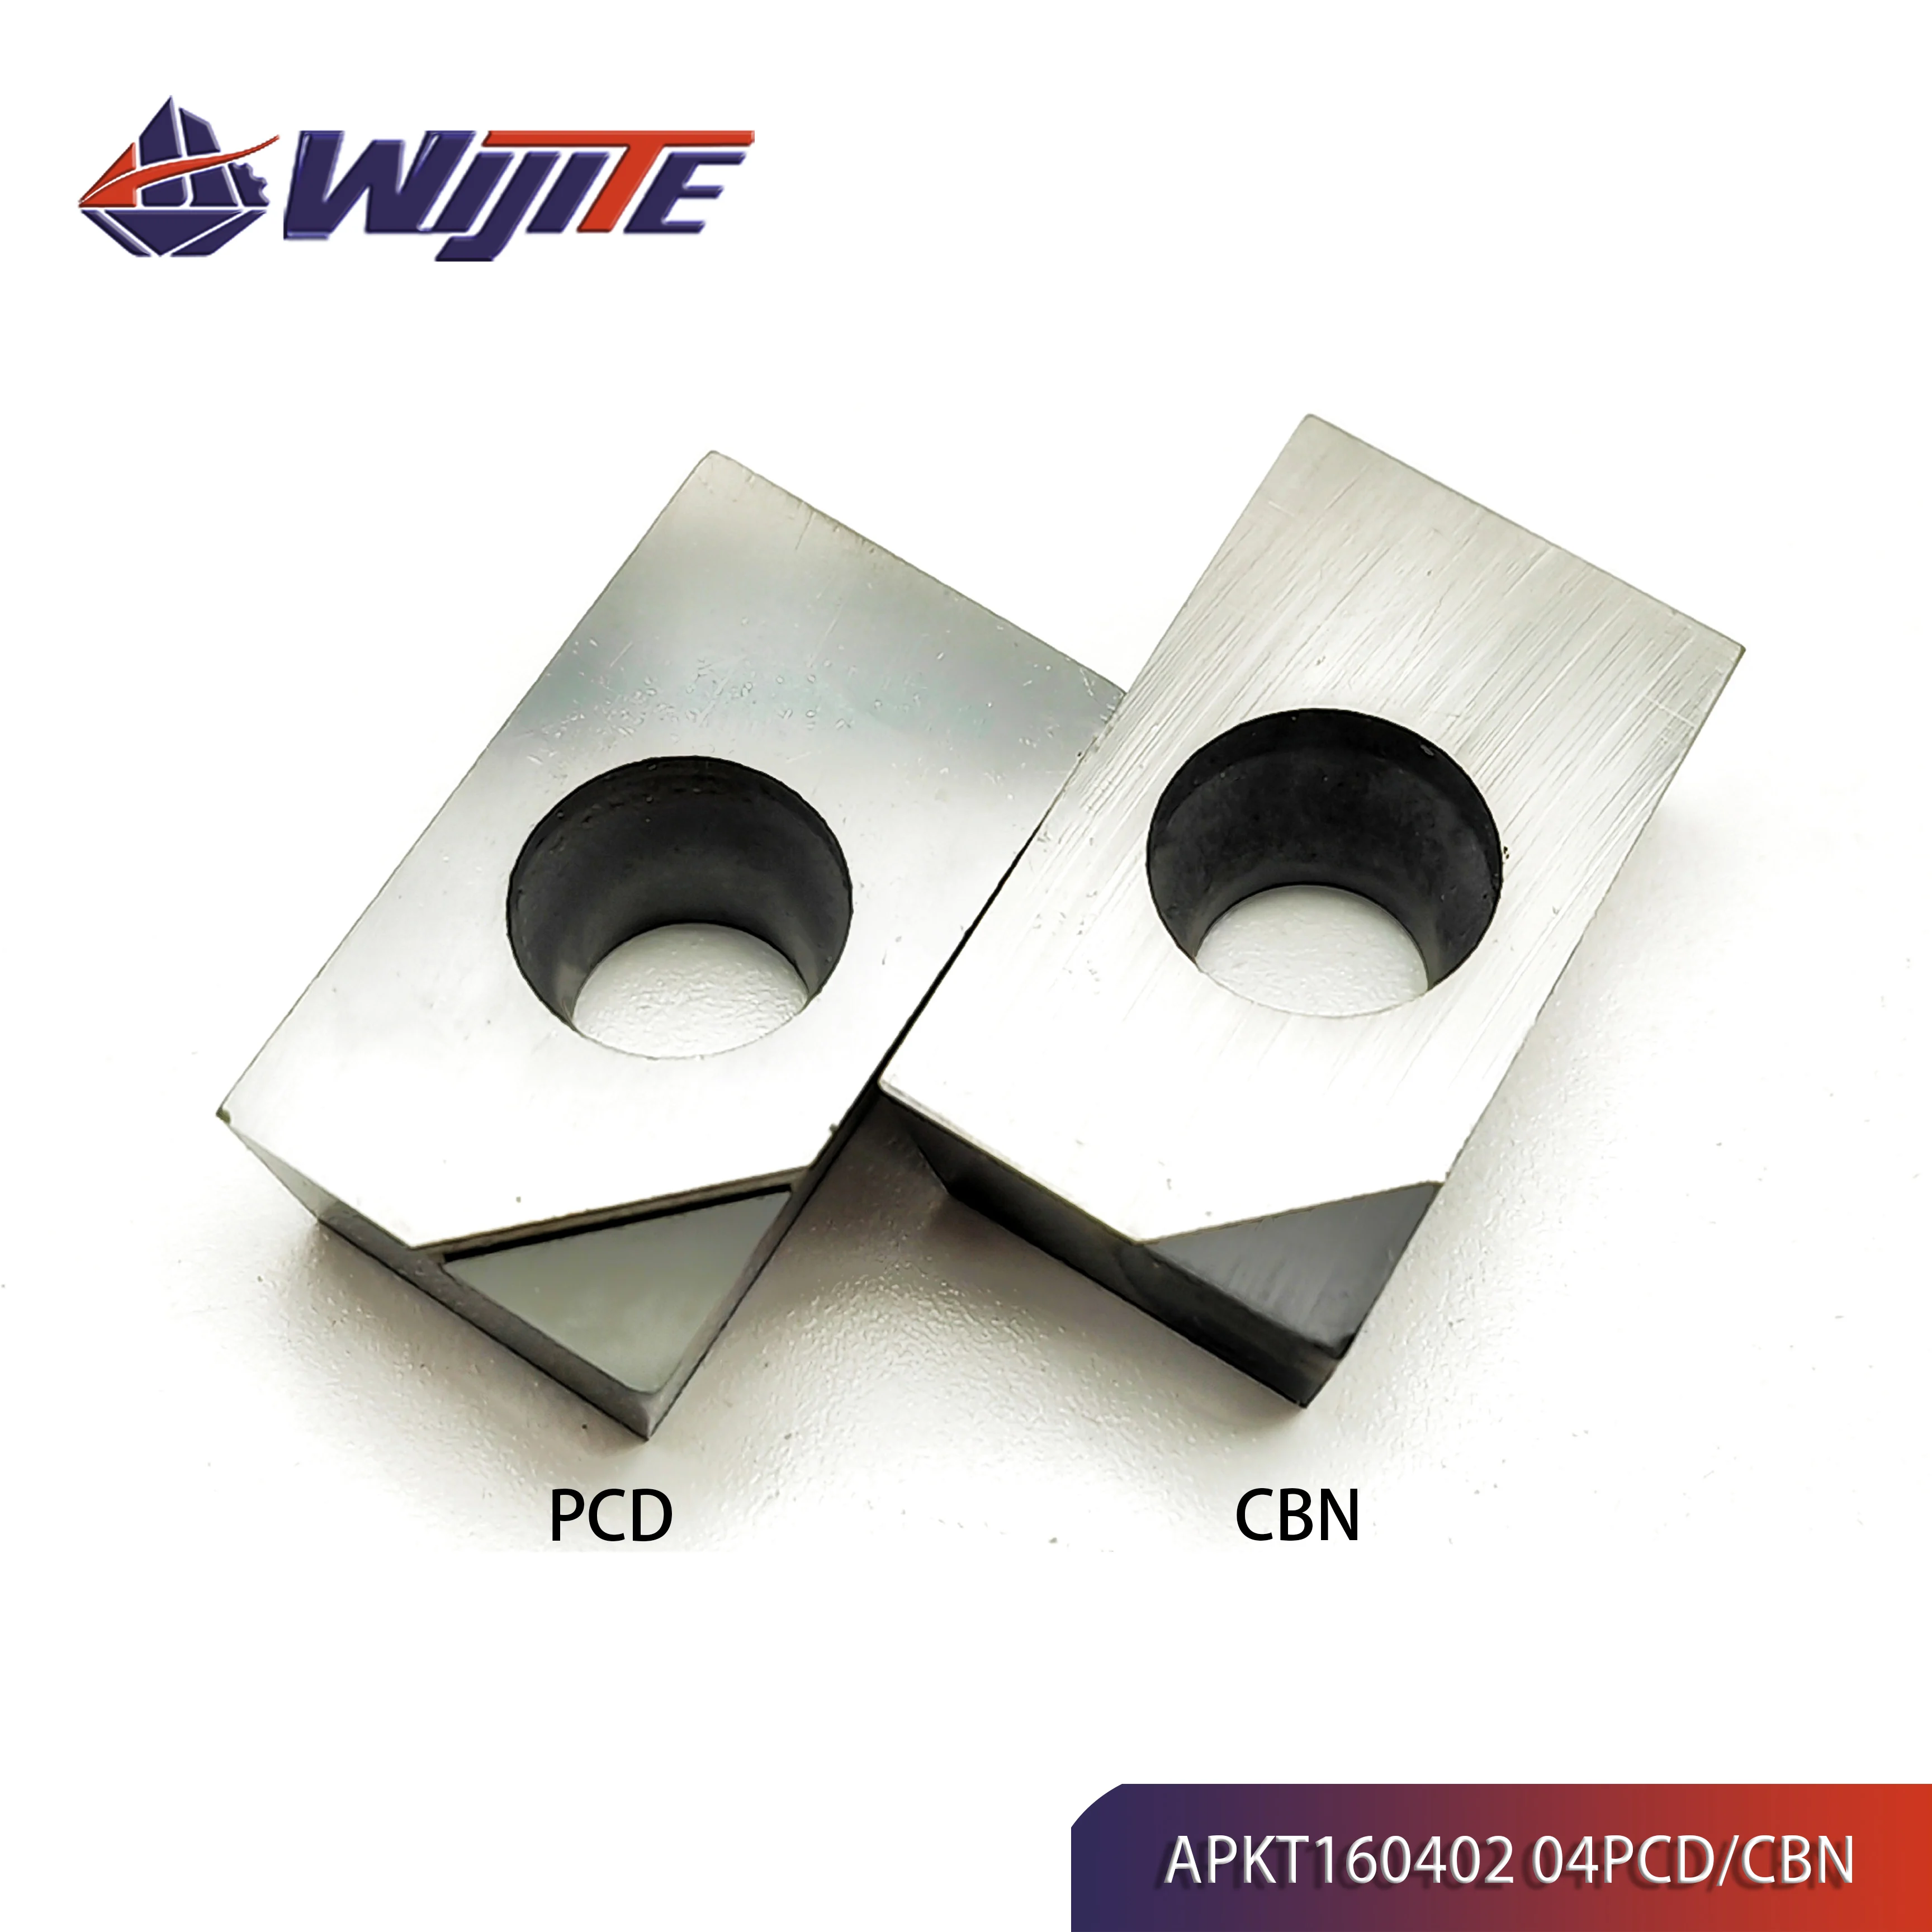 

PCD CBN APKT160402 APKT160404 CNC Face milling tool High quality turning Used for non-ferrous metals such as copper and aluminum